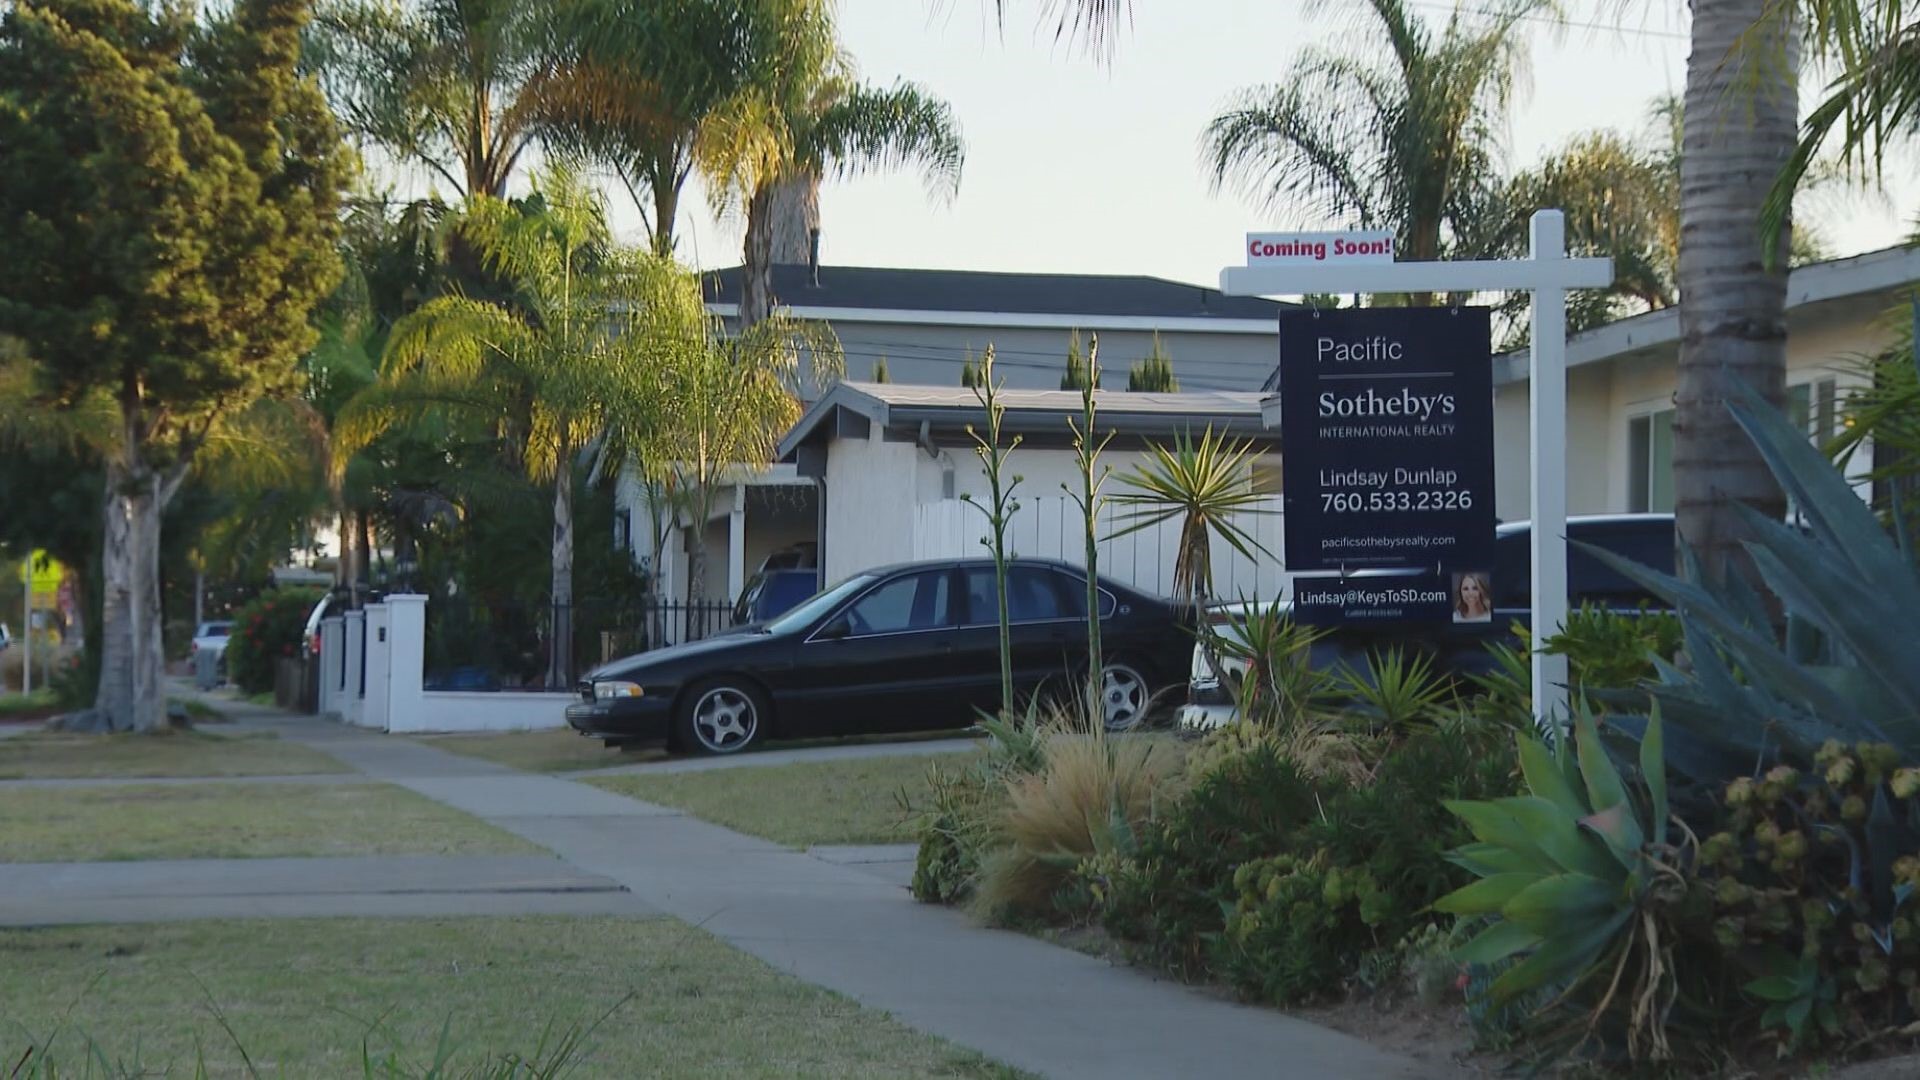 Local realtor says there is a lot of uncertainty in San Diego's housing market.